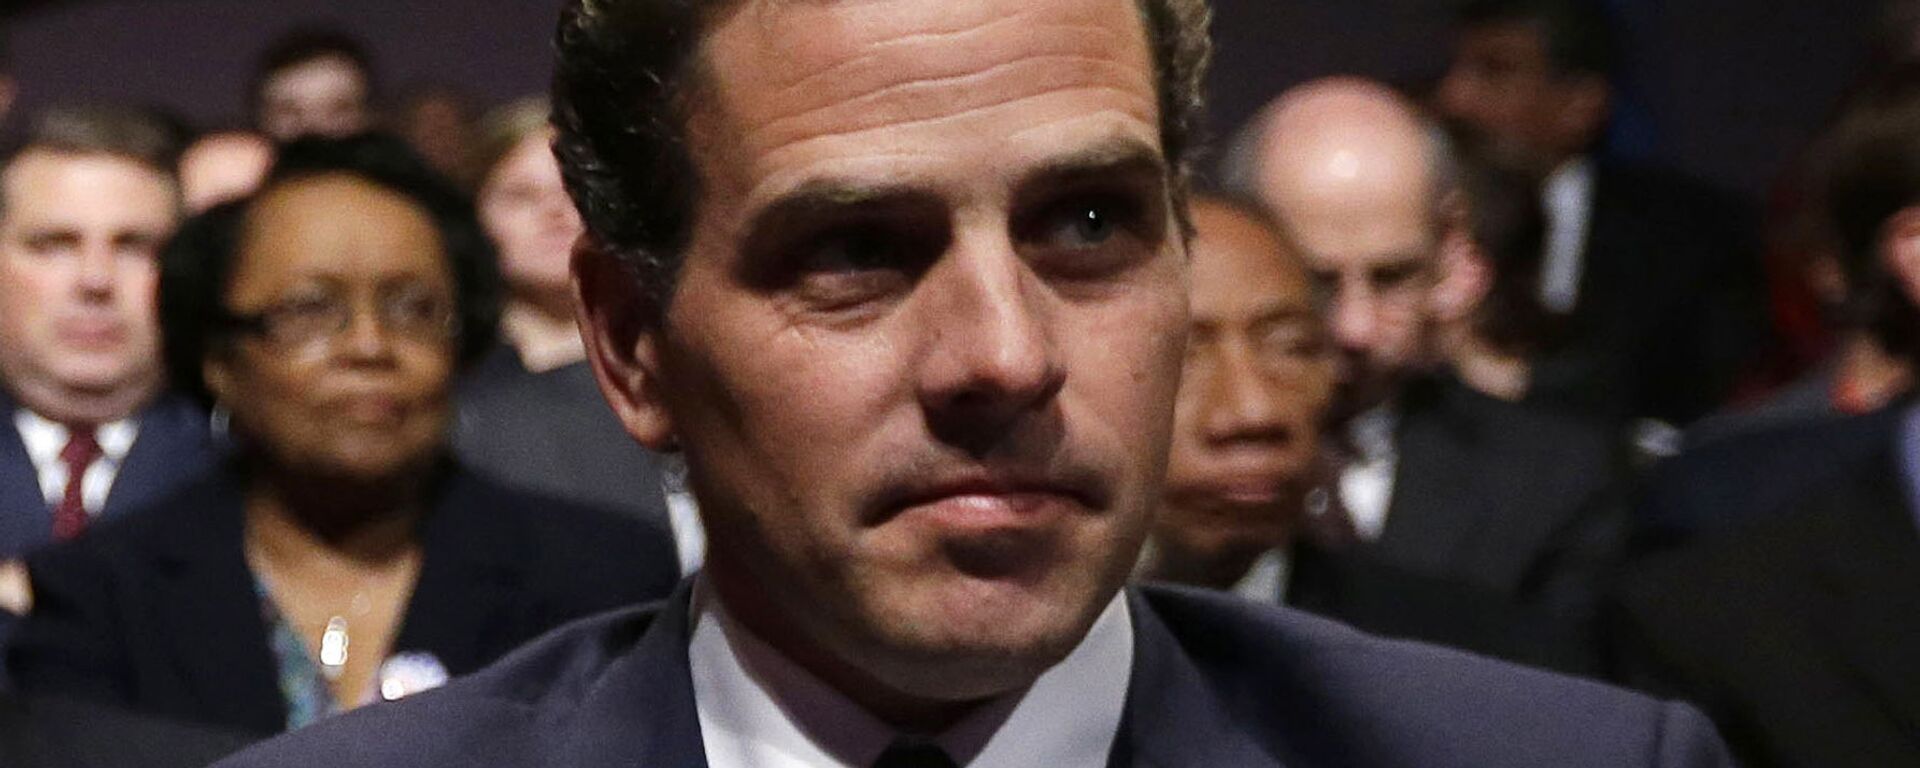 In this Oct. 11, 2012, file photo, Hunter Biden waits for the start of the his father's, Vice President Joe Biden's, debate at Centre College in Danville, Ky. In 2014, then-Vice President Joe Biden was at the forefront of American diplomatic efforts to support Ukraine's fragile democratic government as it sought to fend off Russian aggression and root out corruption. So it raised eyebrows when Biden's son Hunter was hired by a Ukrainian gas company. President Donald Trump prodded Ukraine's president to help him investigate any corruption related to Joe Biden, now one of the top Democrats seeking to defeat Trump in 2020. - Sputnik International, 1920, 10.12.2020